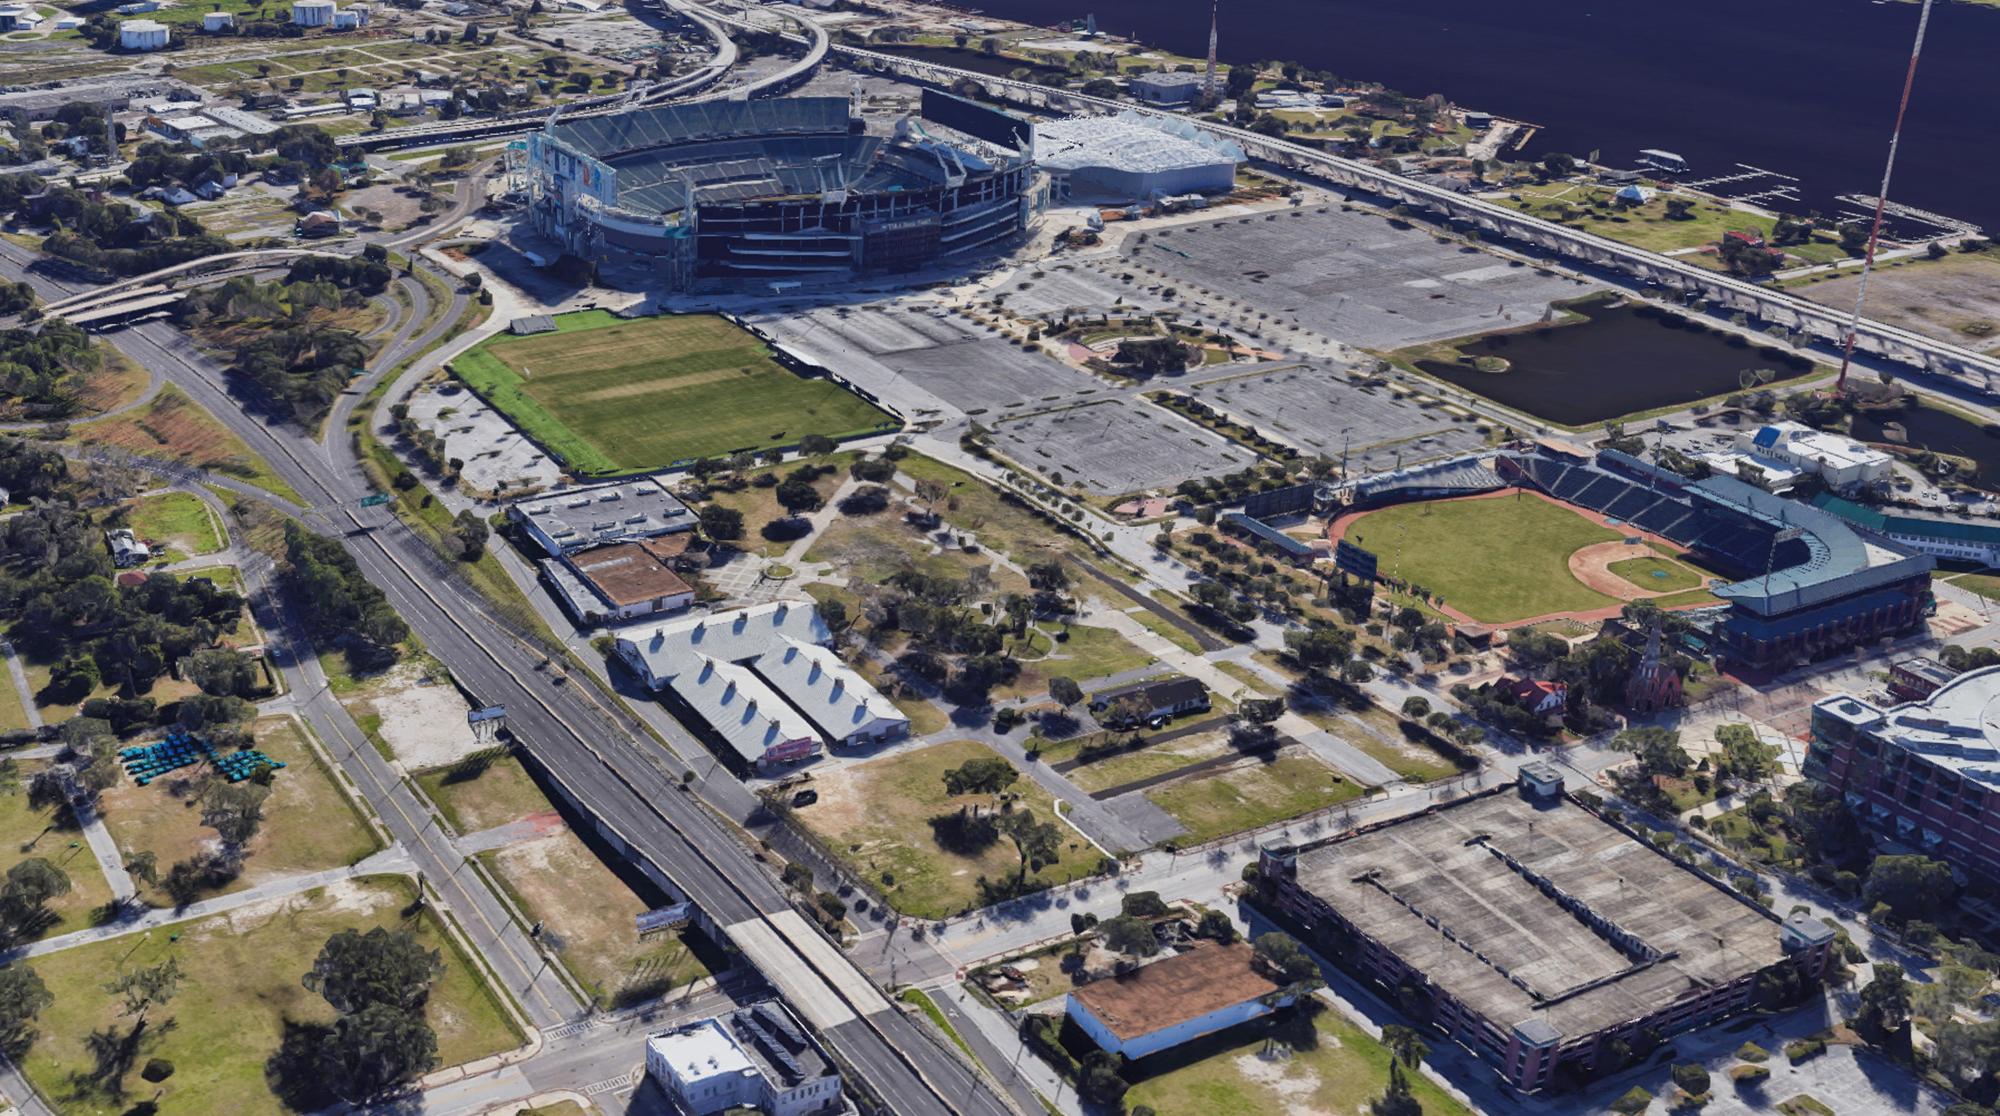 The Greater Jacksonville Agricultural Fair Association property adjacent to TIAA Bank Field. (Google)